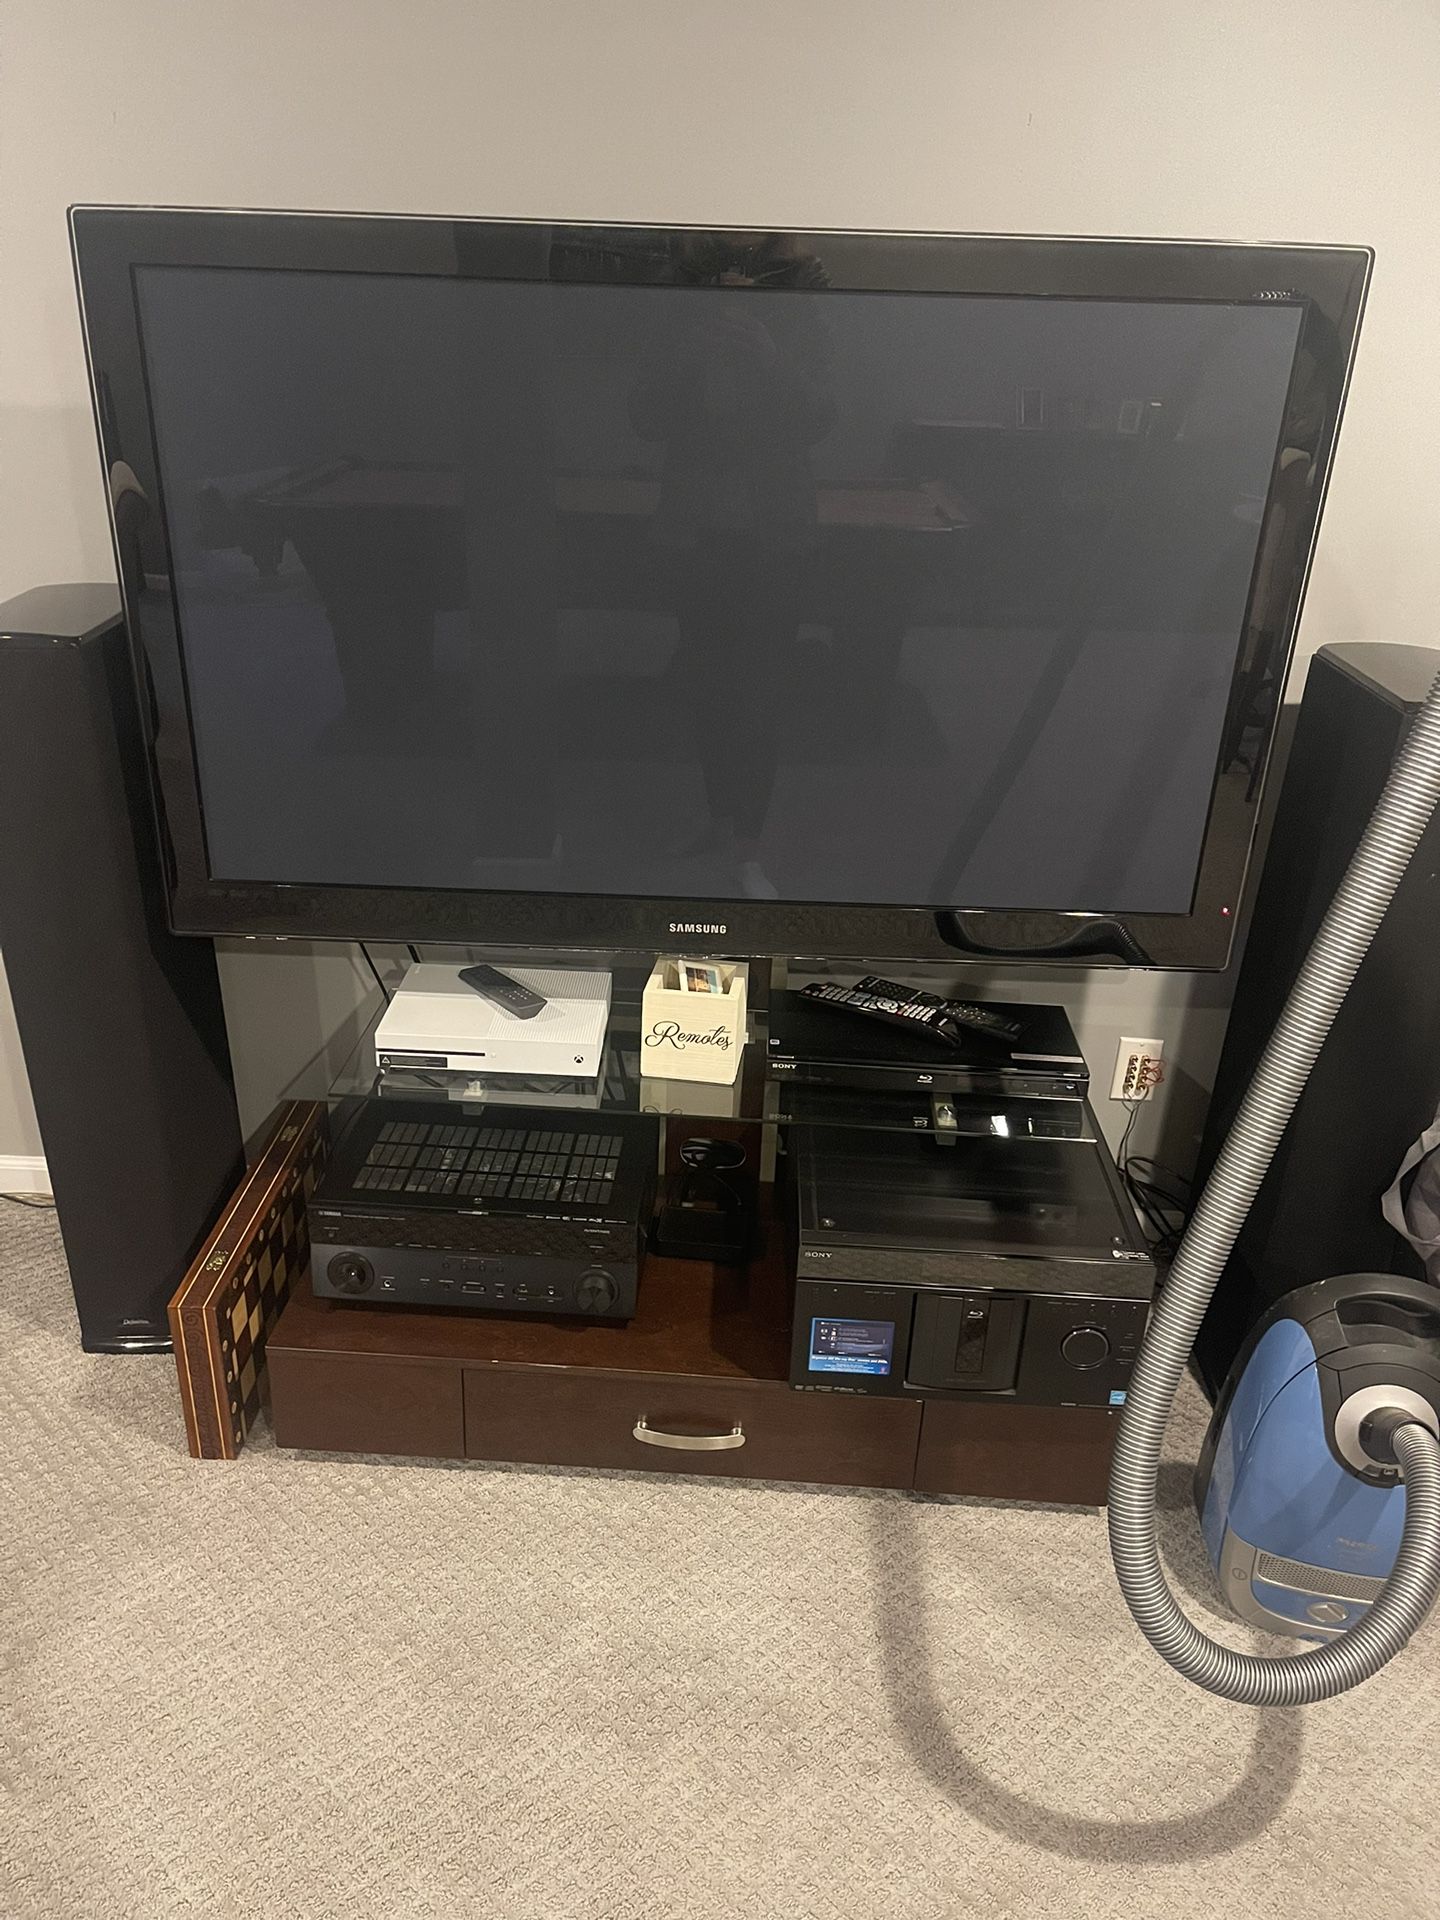 60 Inch  Plasma Tv-stand Included! $69